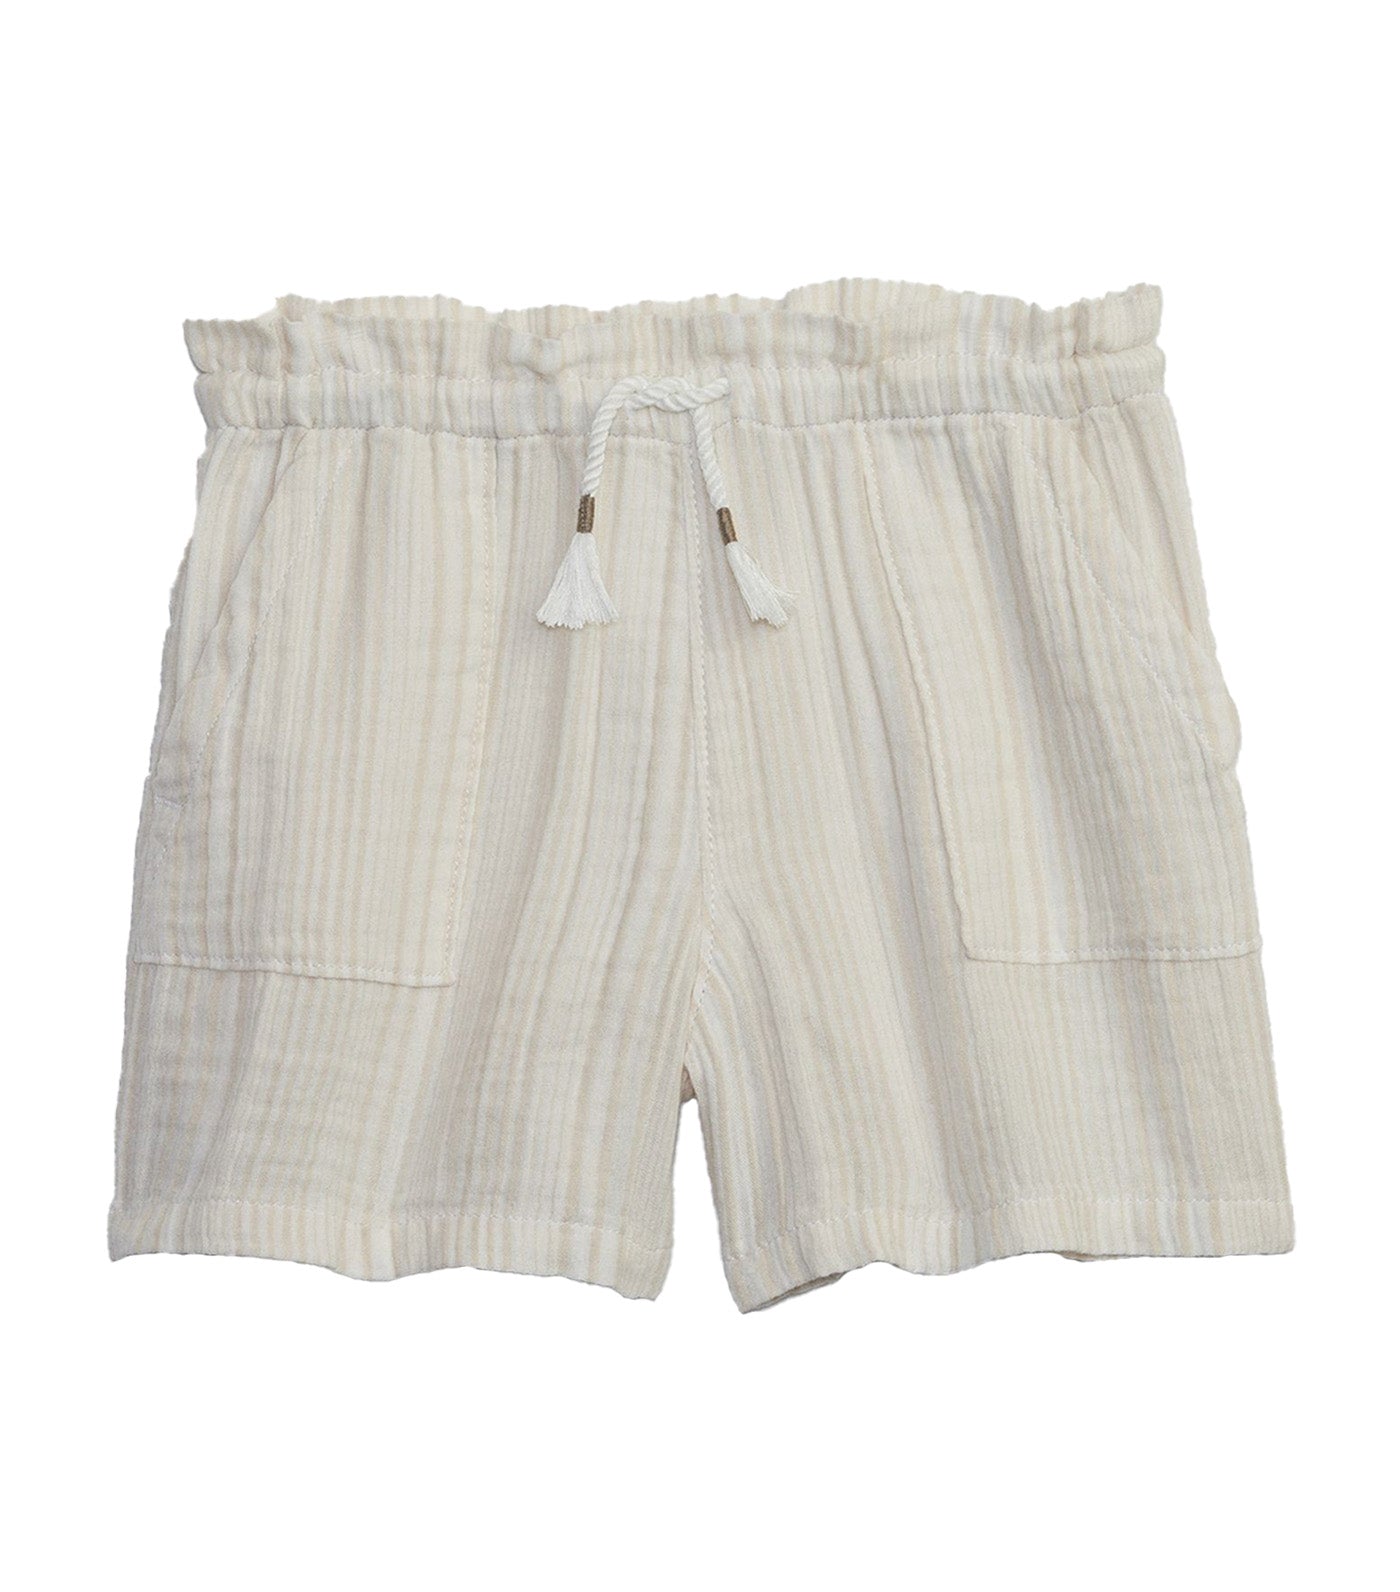 Utility Pull-On Shorts with Washwell - New Off White Stripe